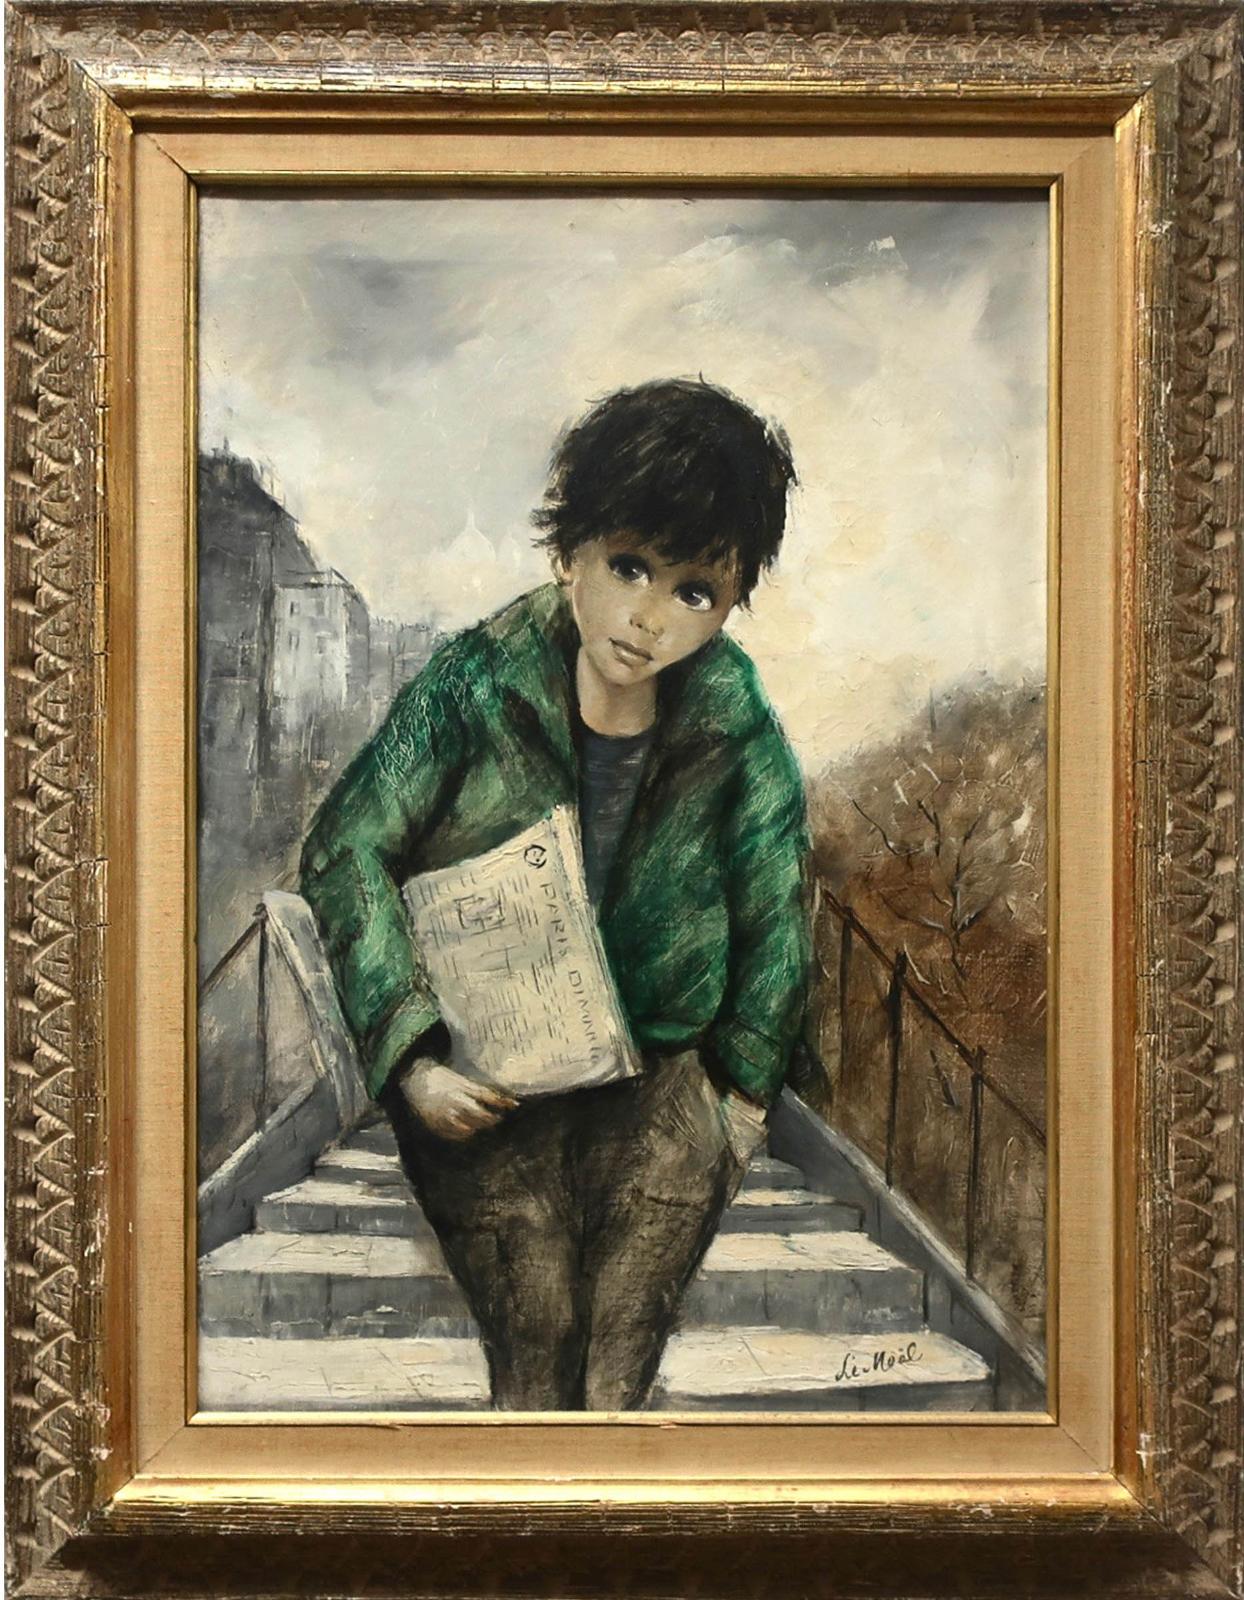 Jan Le Moal - Untitled (Young Paperboy)